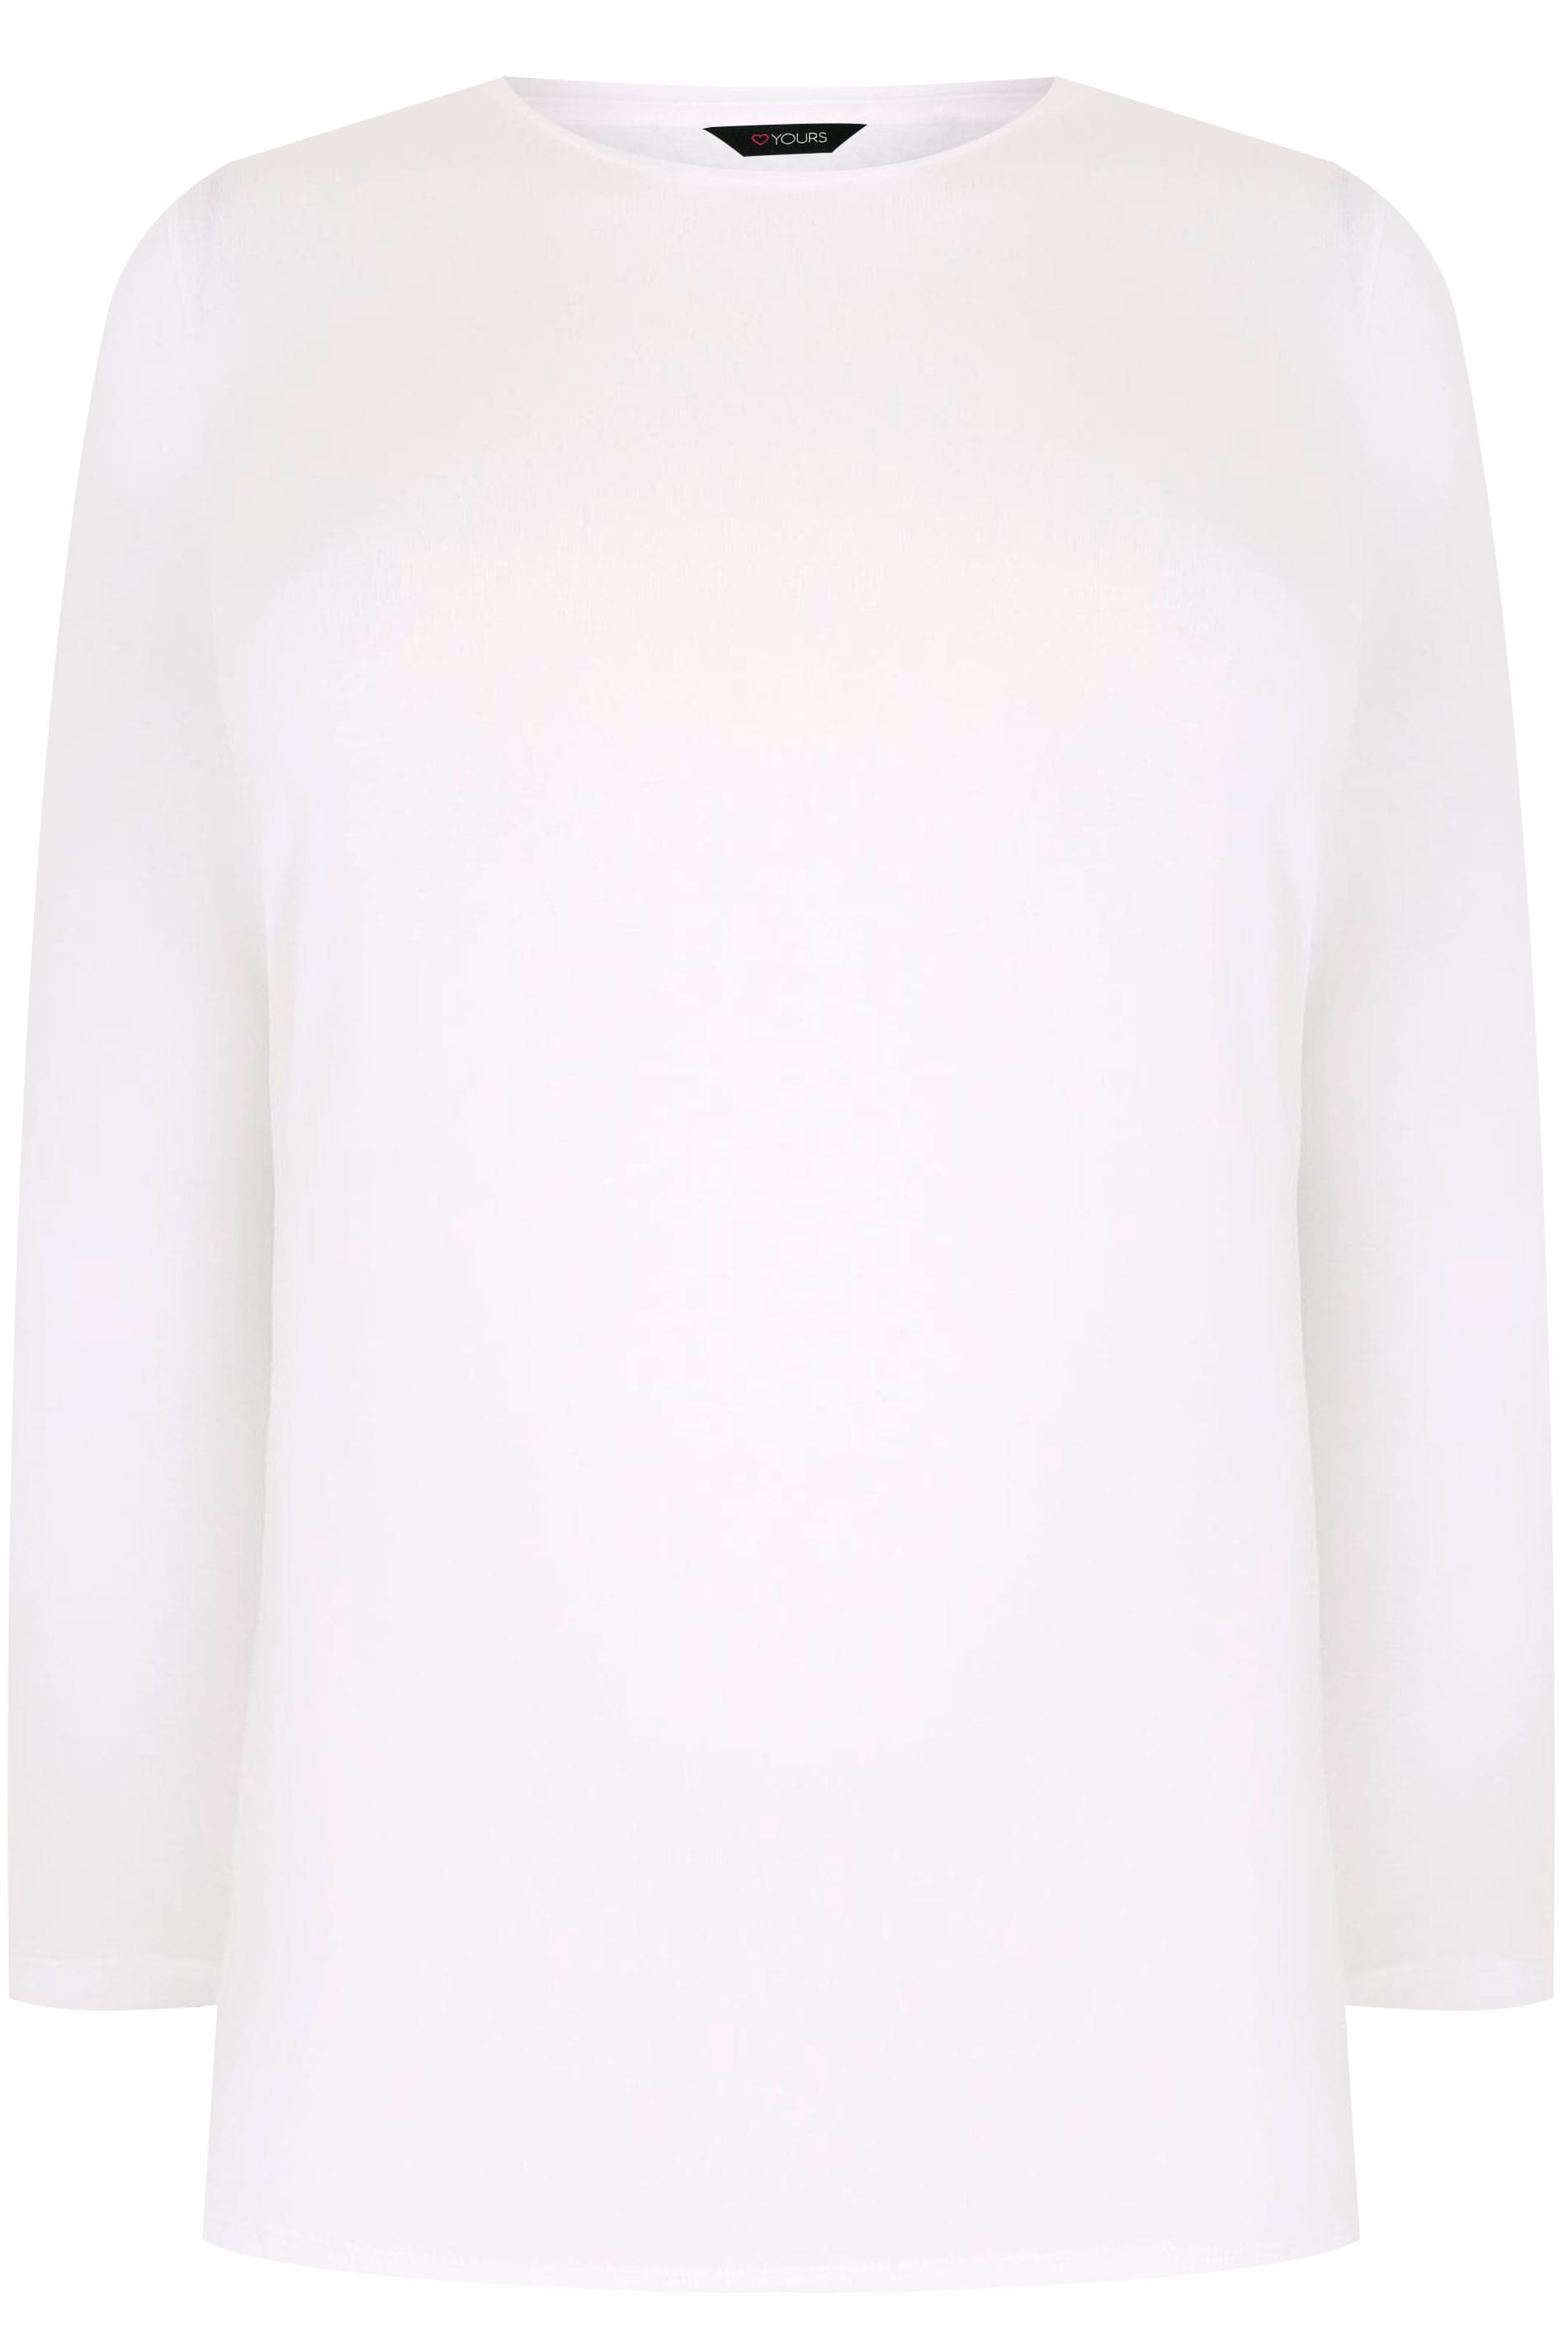 White Long Sleeve Soft Touch Jersey Top, plus size 16 to 36